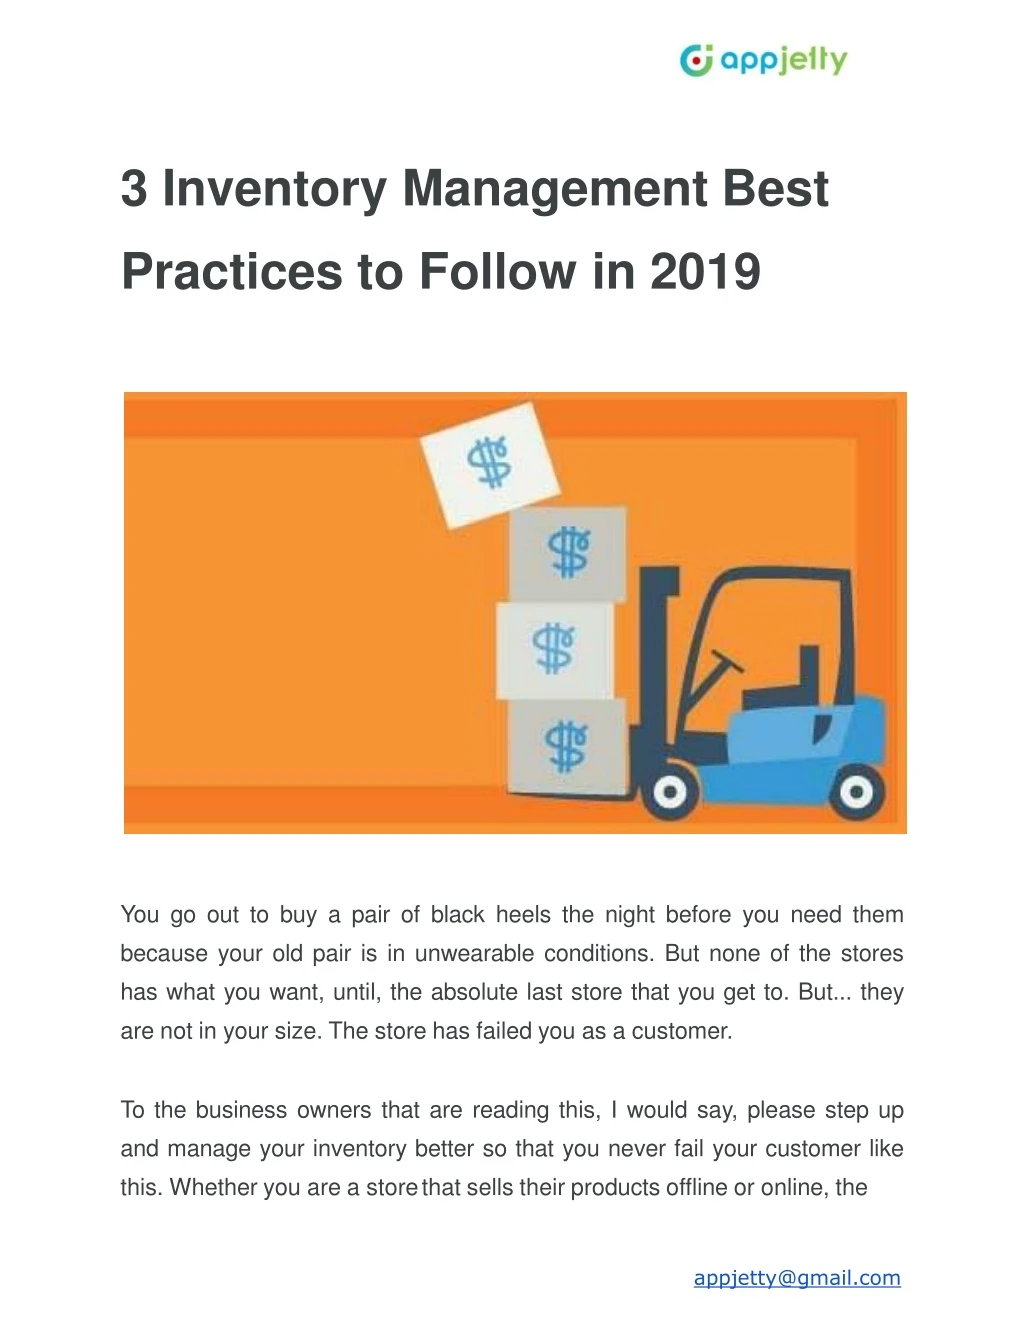 3 inventory management best practices to follow in 2019